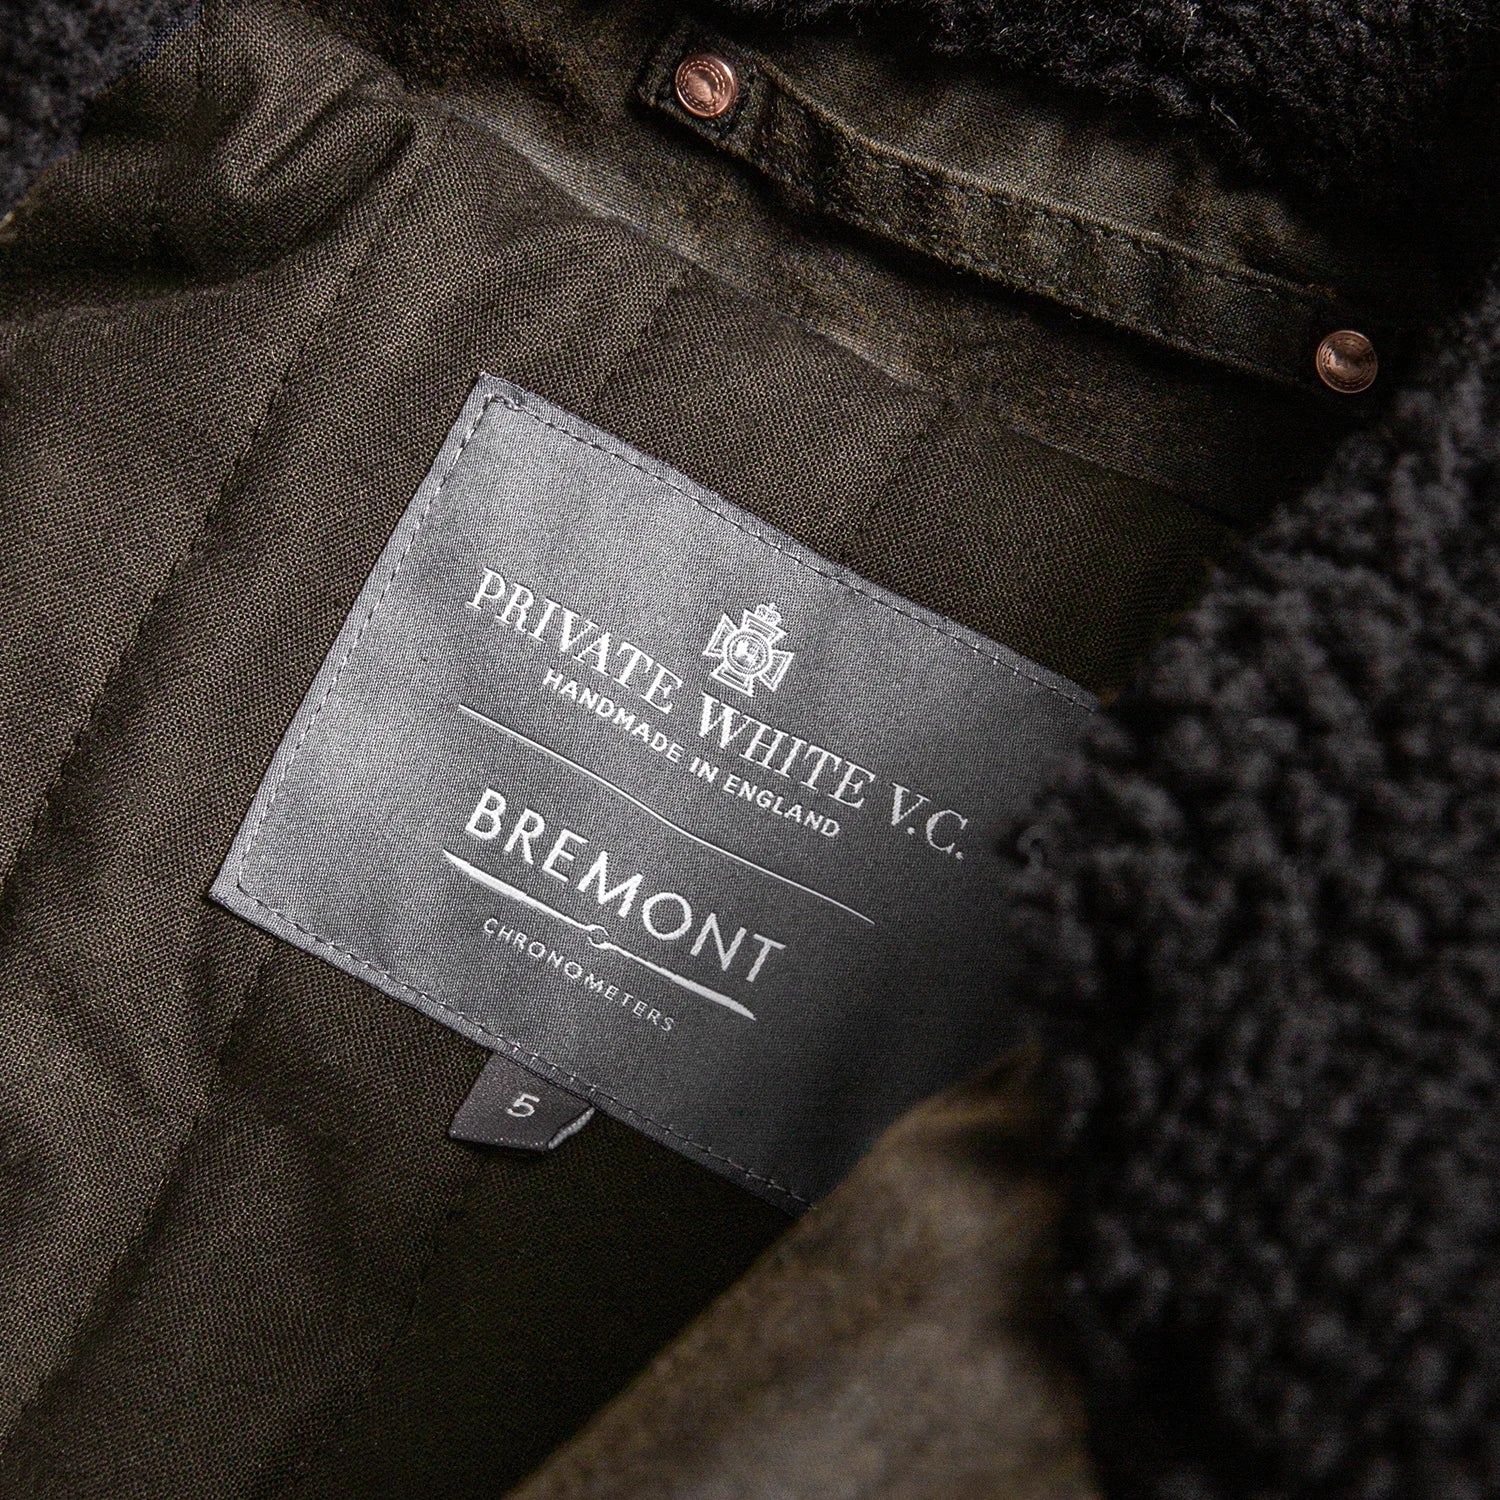 Introducing the exclusive Bremont X Private White V.C. Flight Jacket